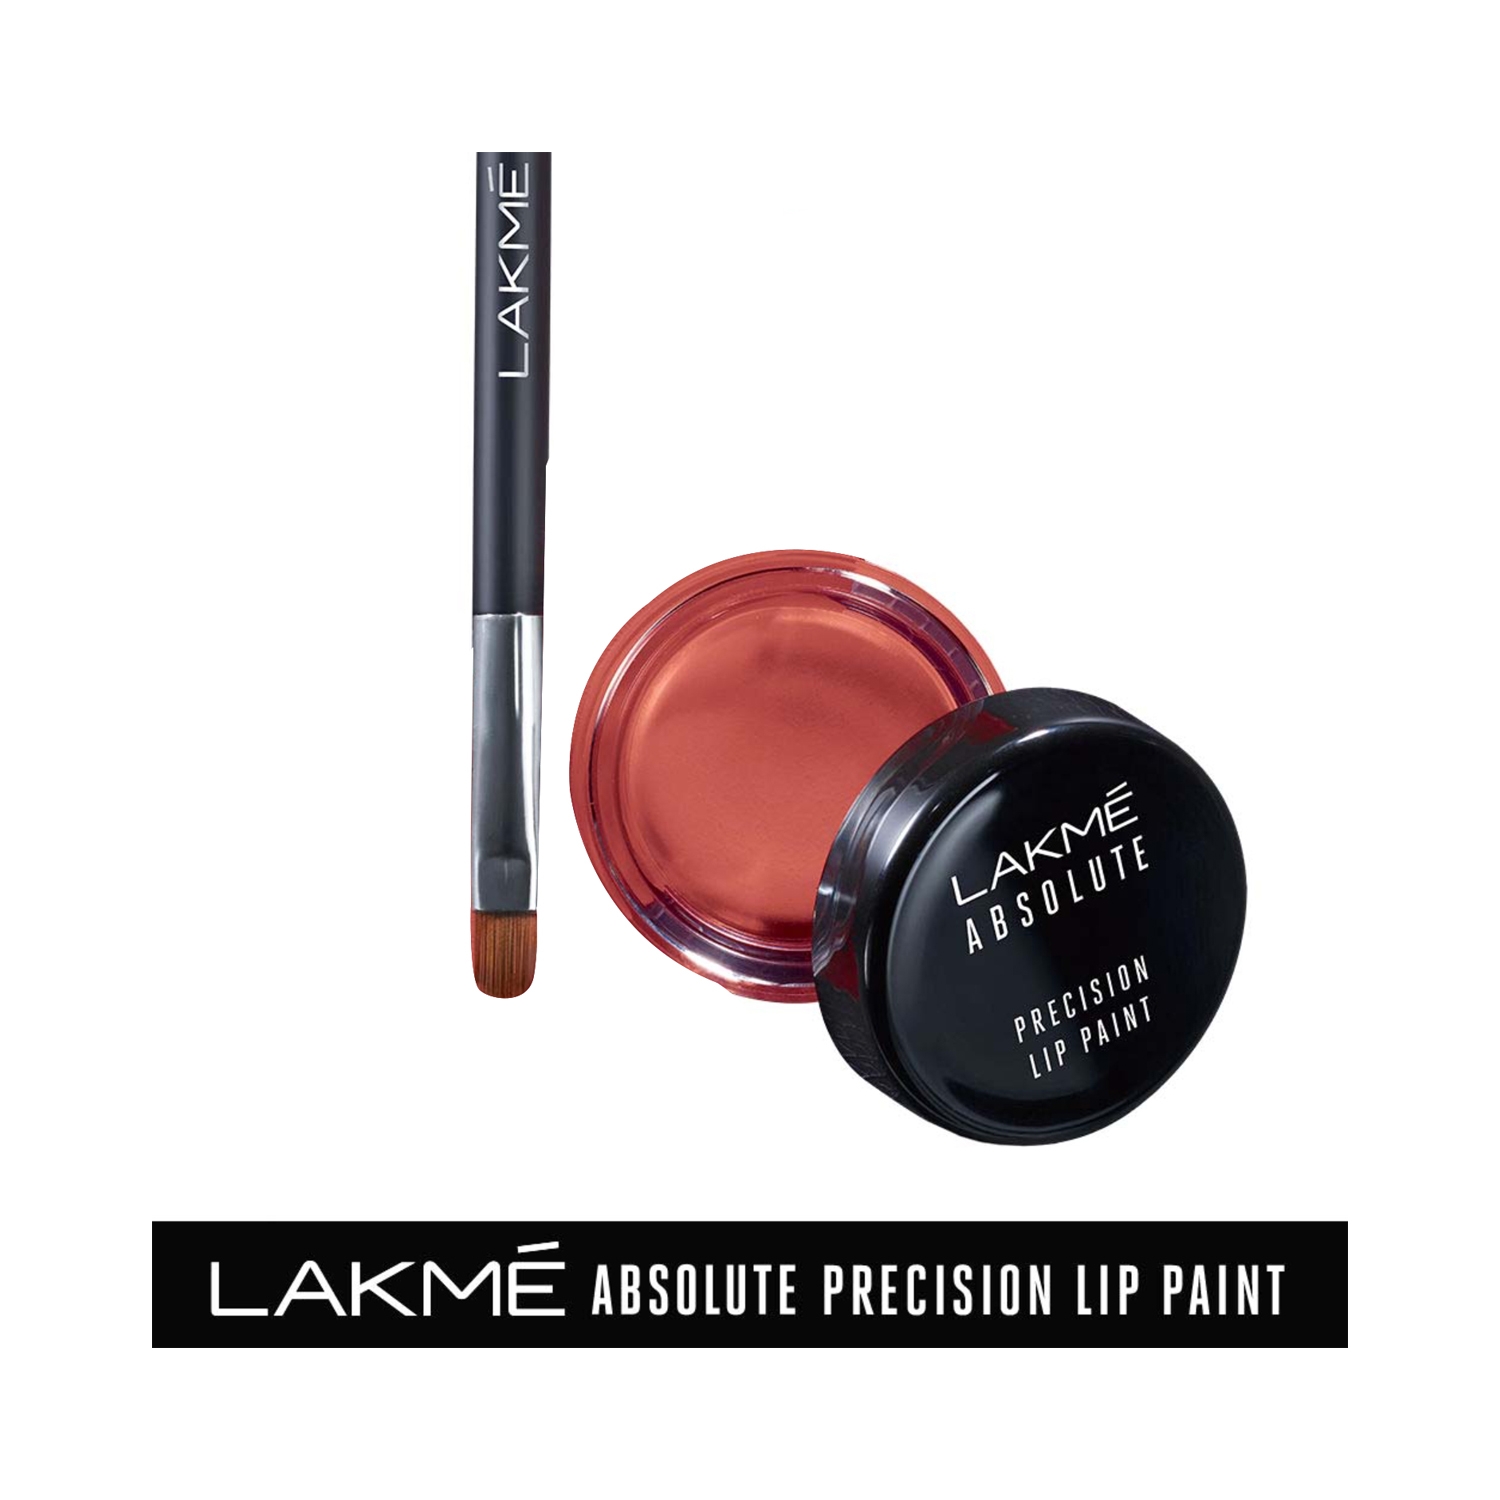 Lakme Absolute Precision Lip Paint - Alluring Nude (3g)